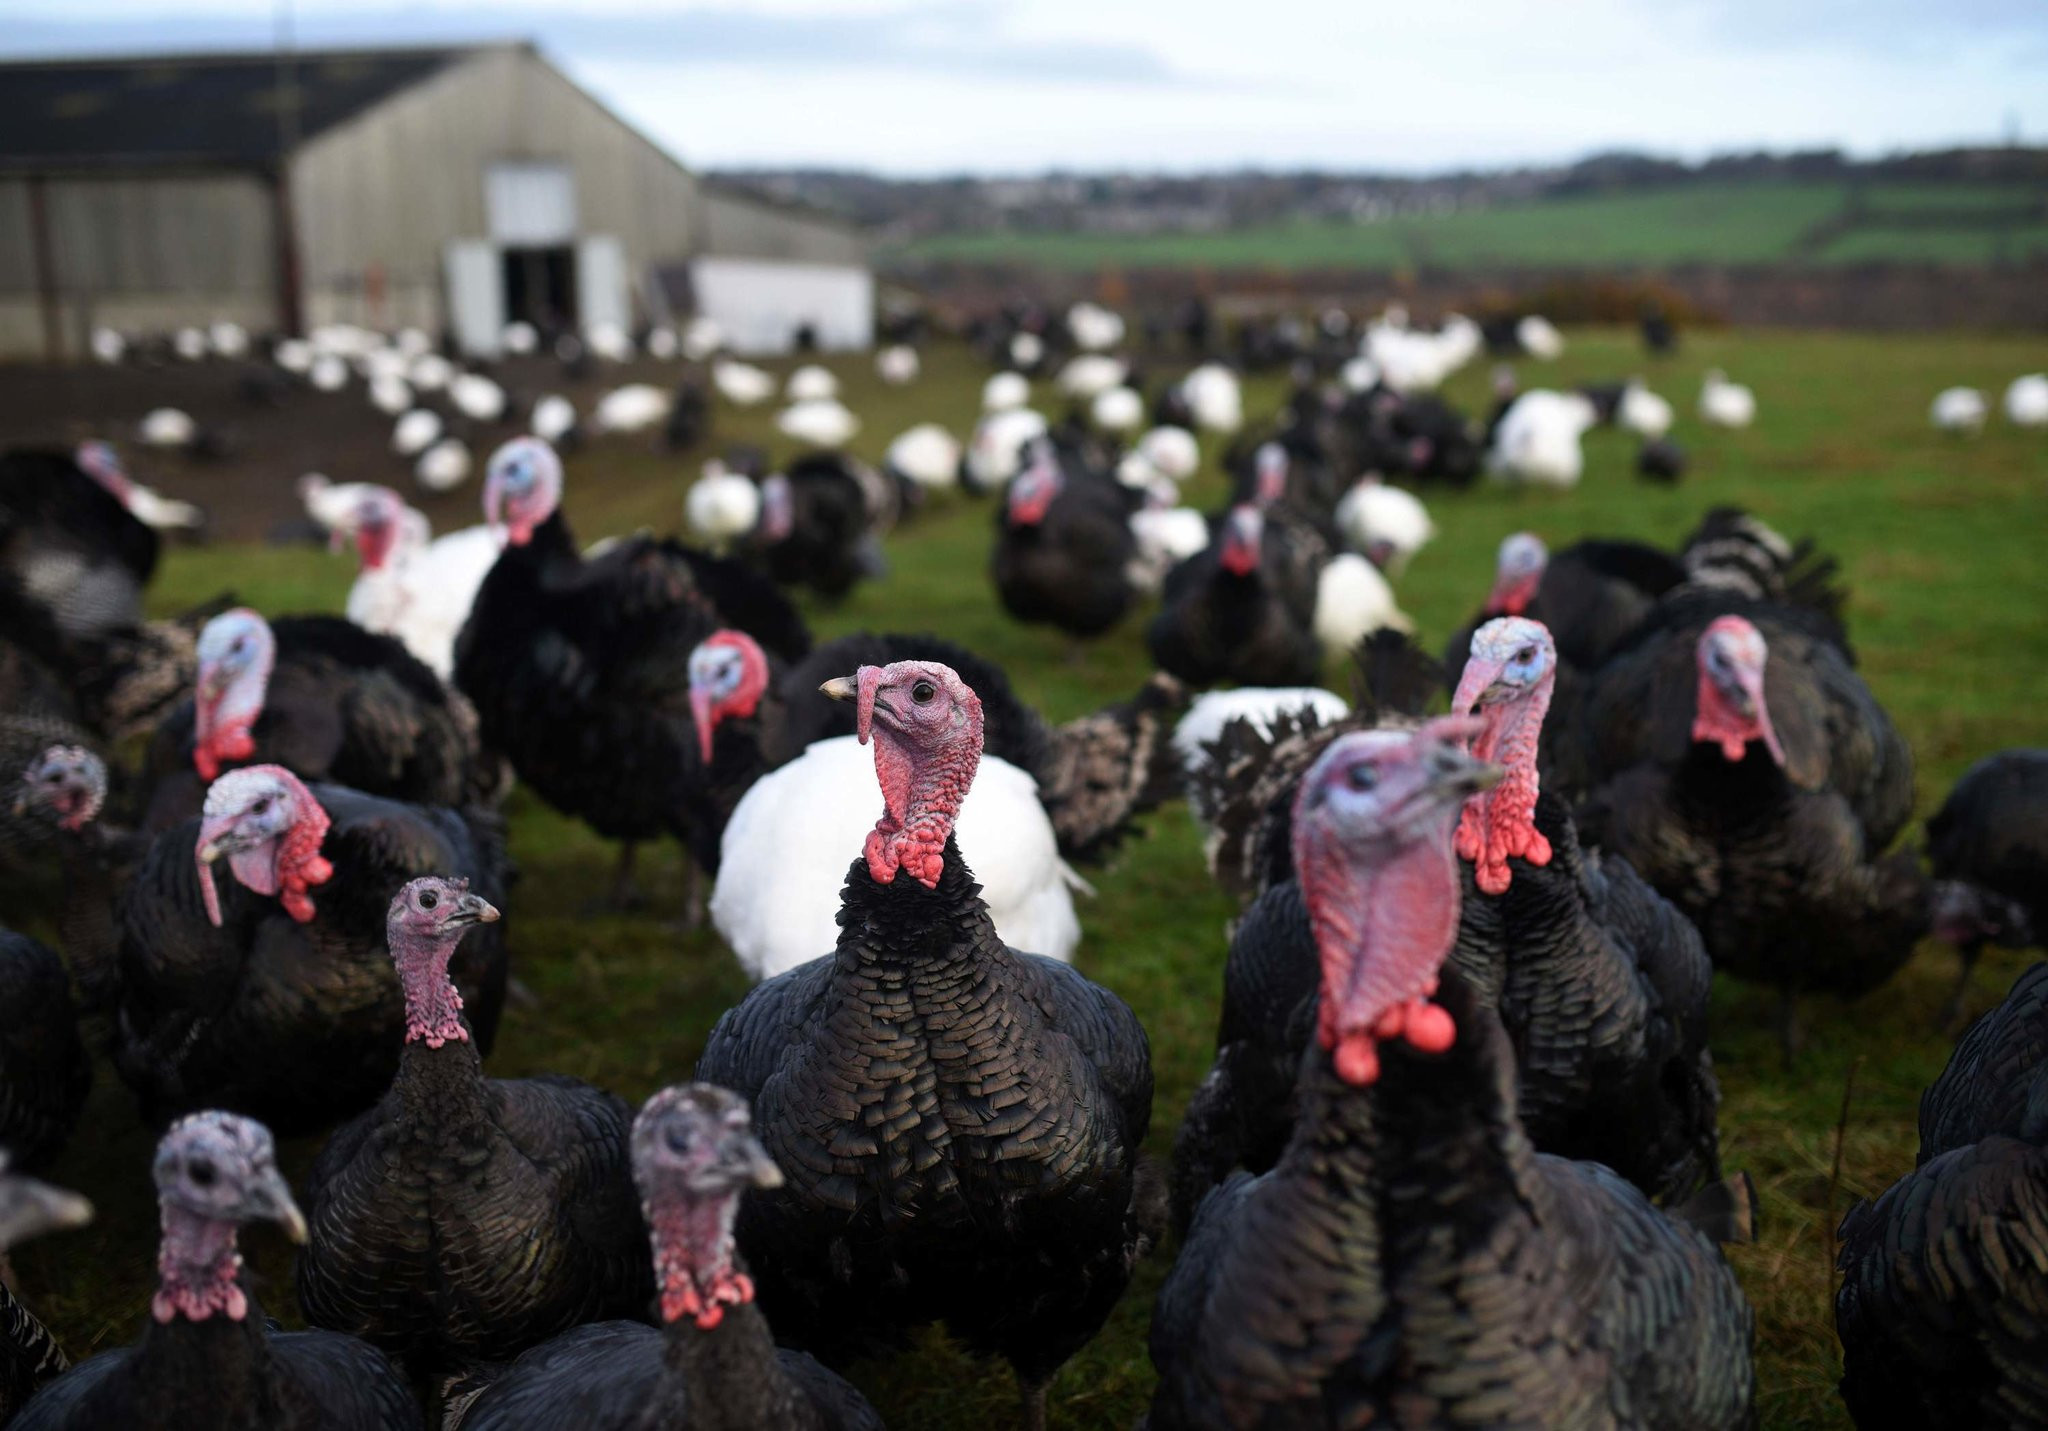 Thanksgiving Video Full Of Turkey
 Thanksgiving Turkeys May Have Been Tamed 1 500 Years Ago